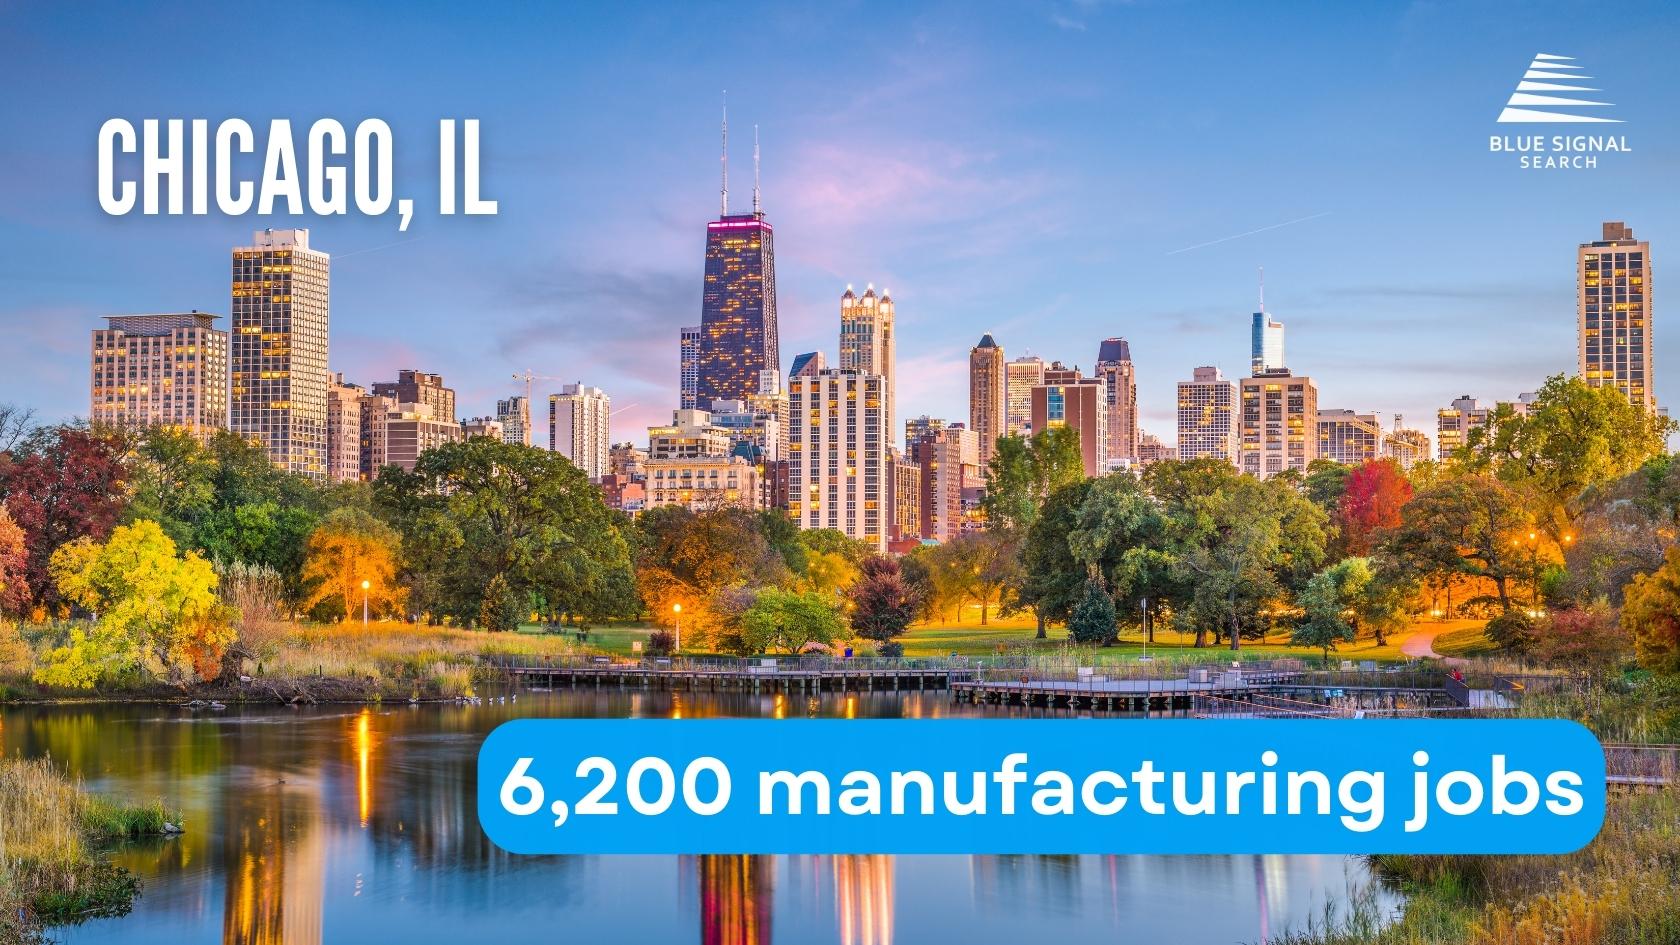 Skyline of Chicago, IL with key manufacturing statistics highlighted.